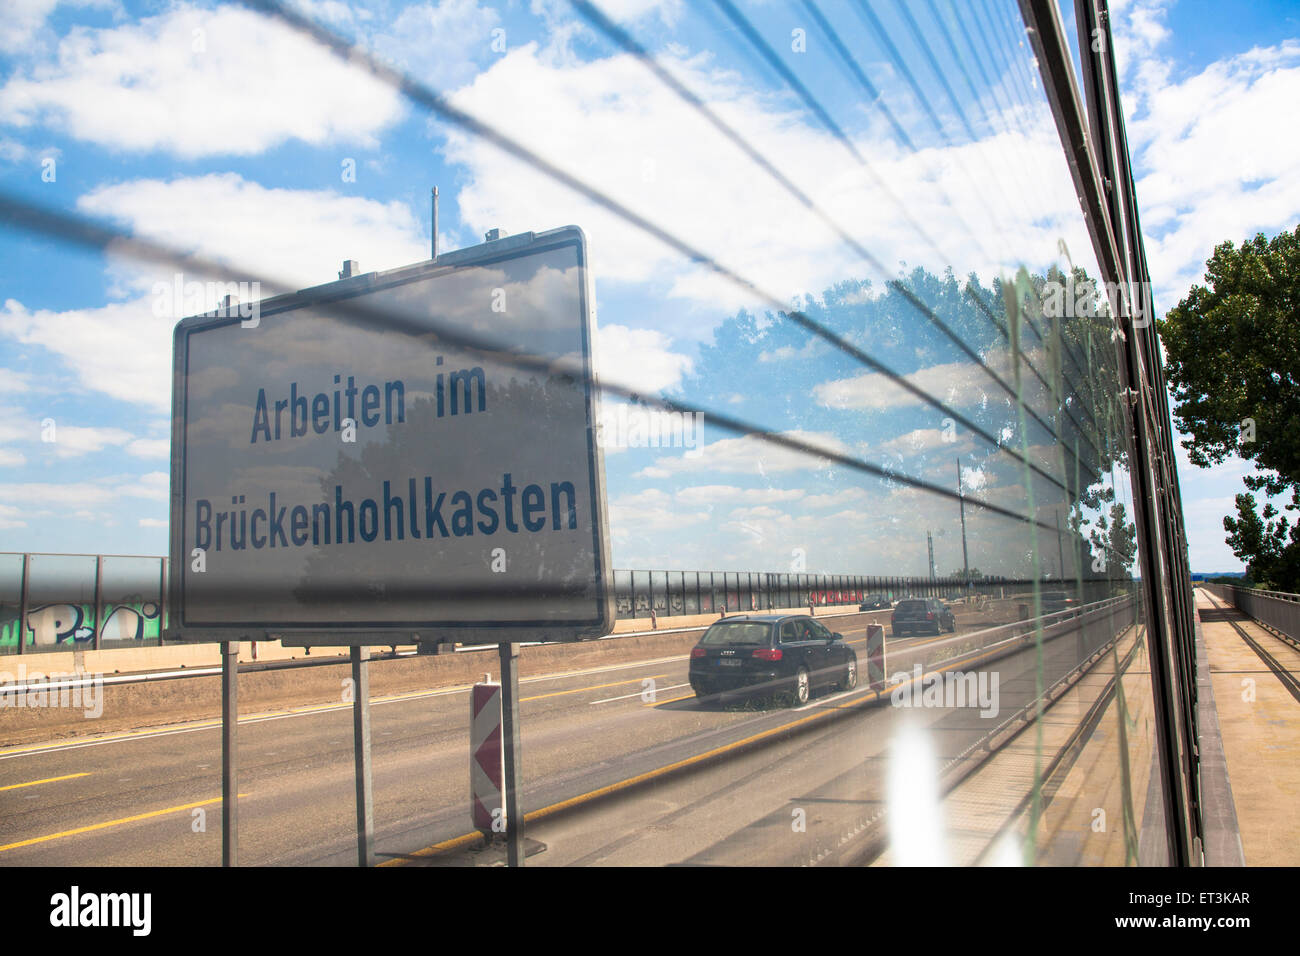 Europe, Germany, Cologne, the Rhine bridge of the Autobahn A1 between Cologne and Leverkusen. Looking through the glass noise ba Stock Photo